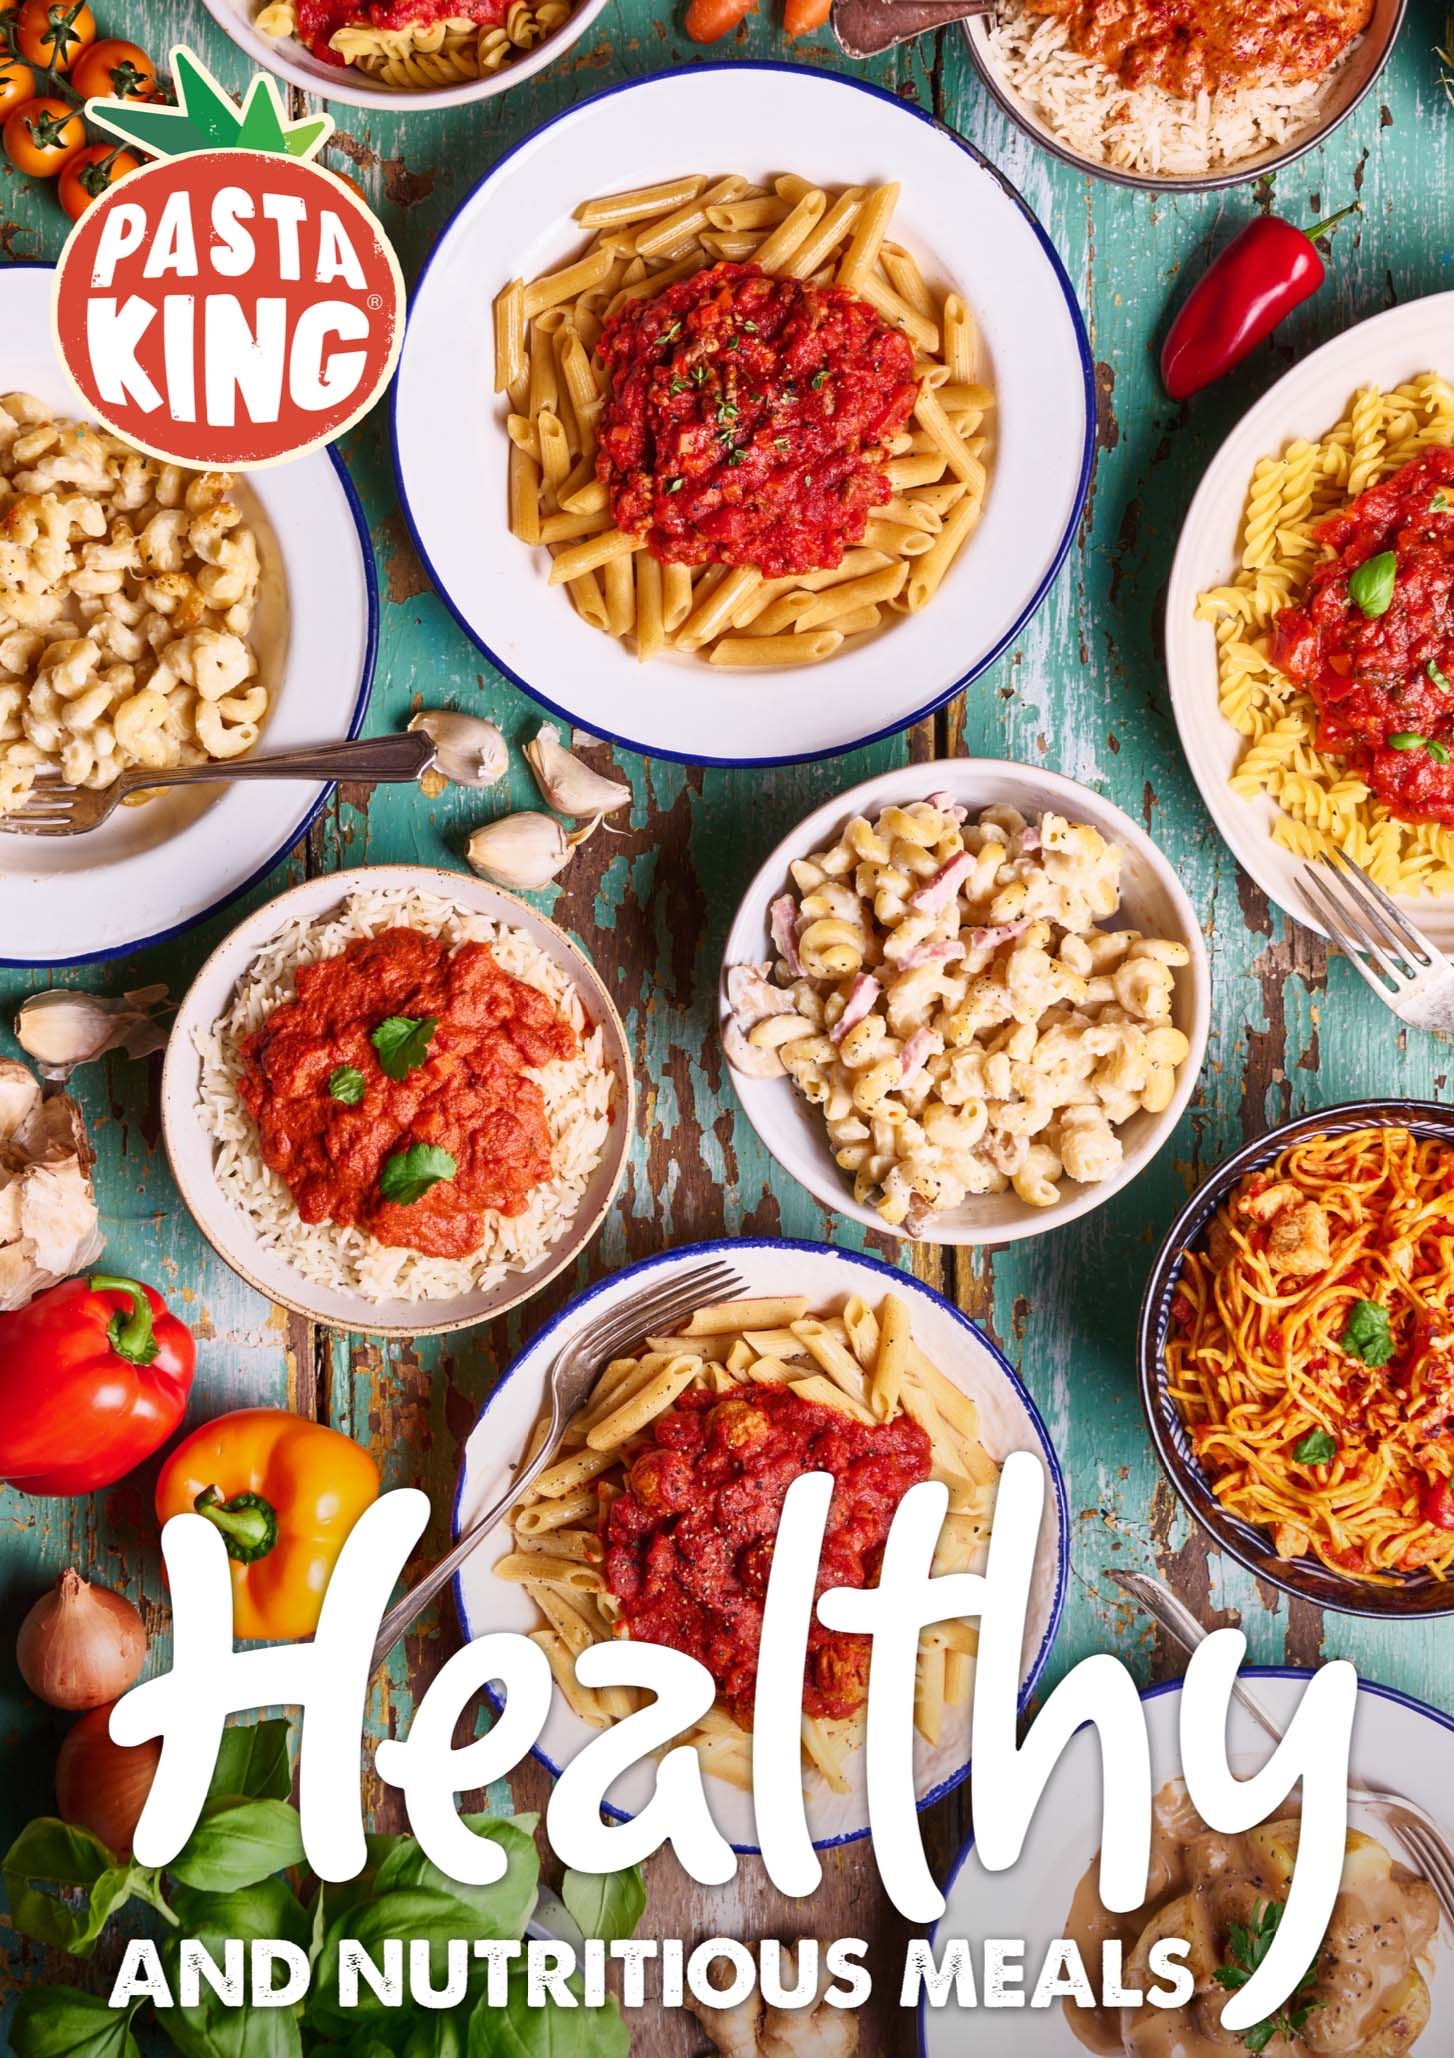 ‘Healthy and nutritious meals’ Poster